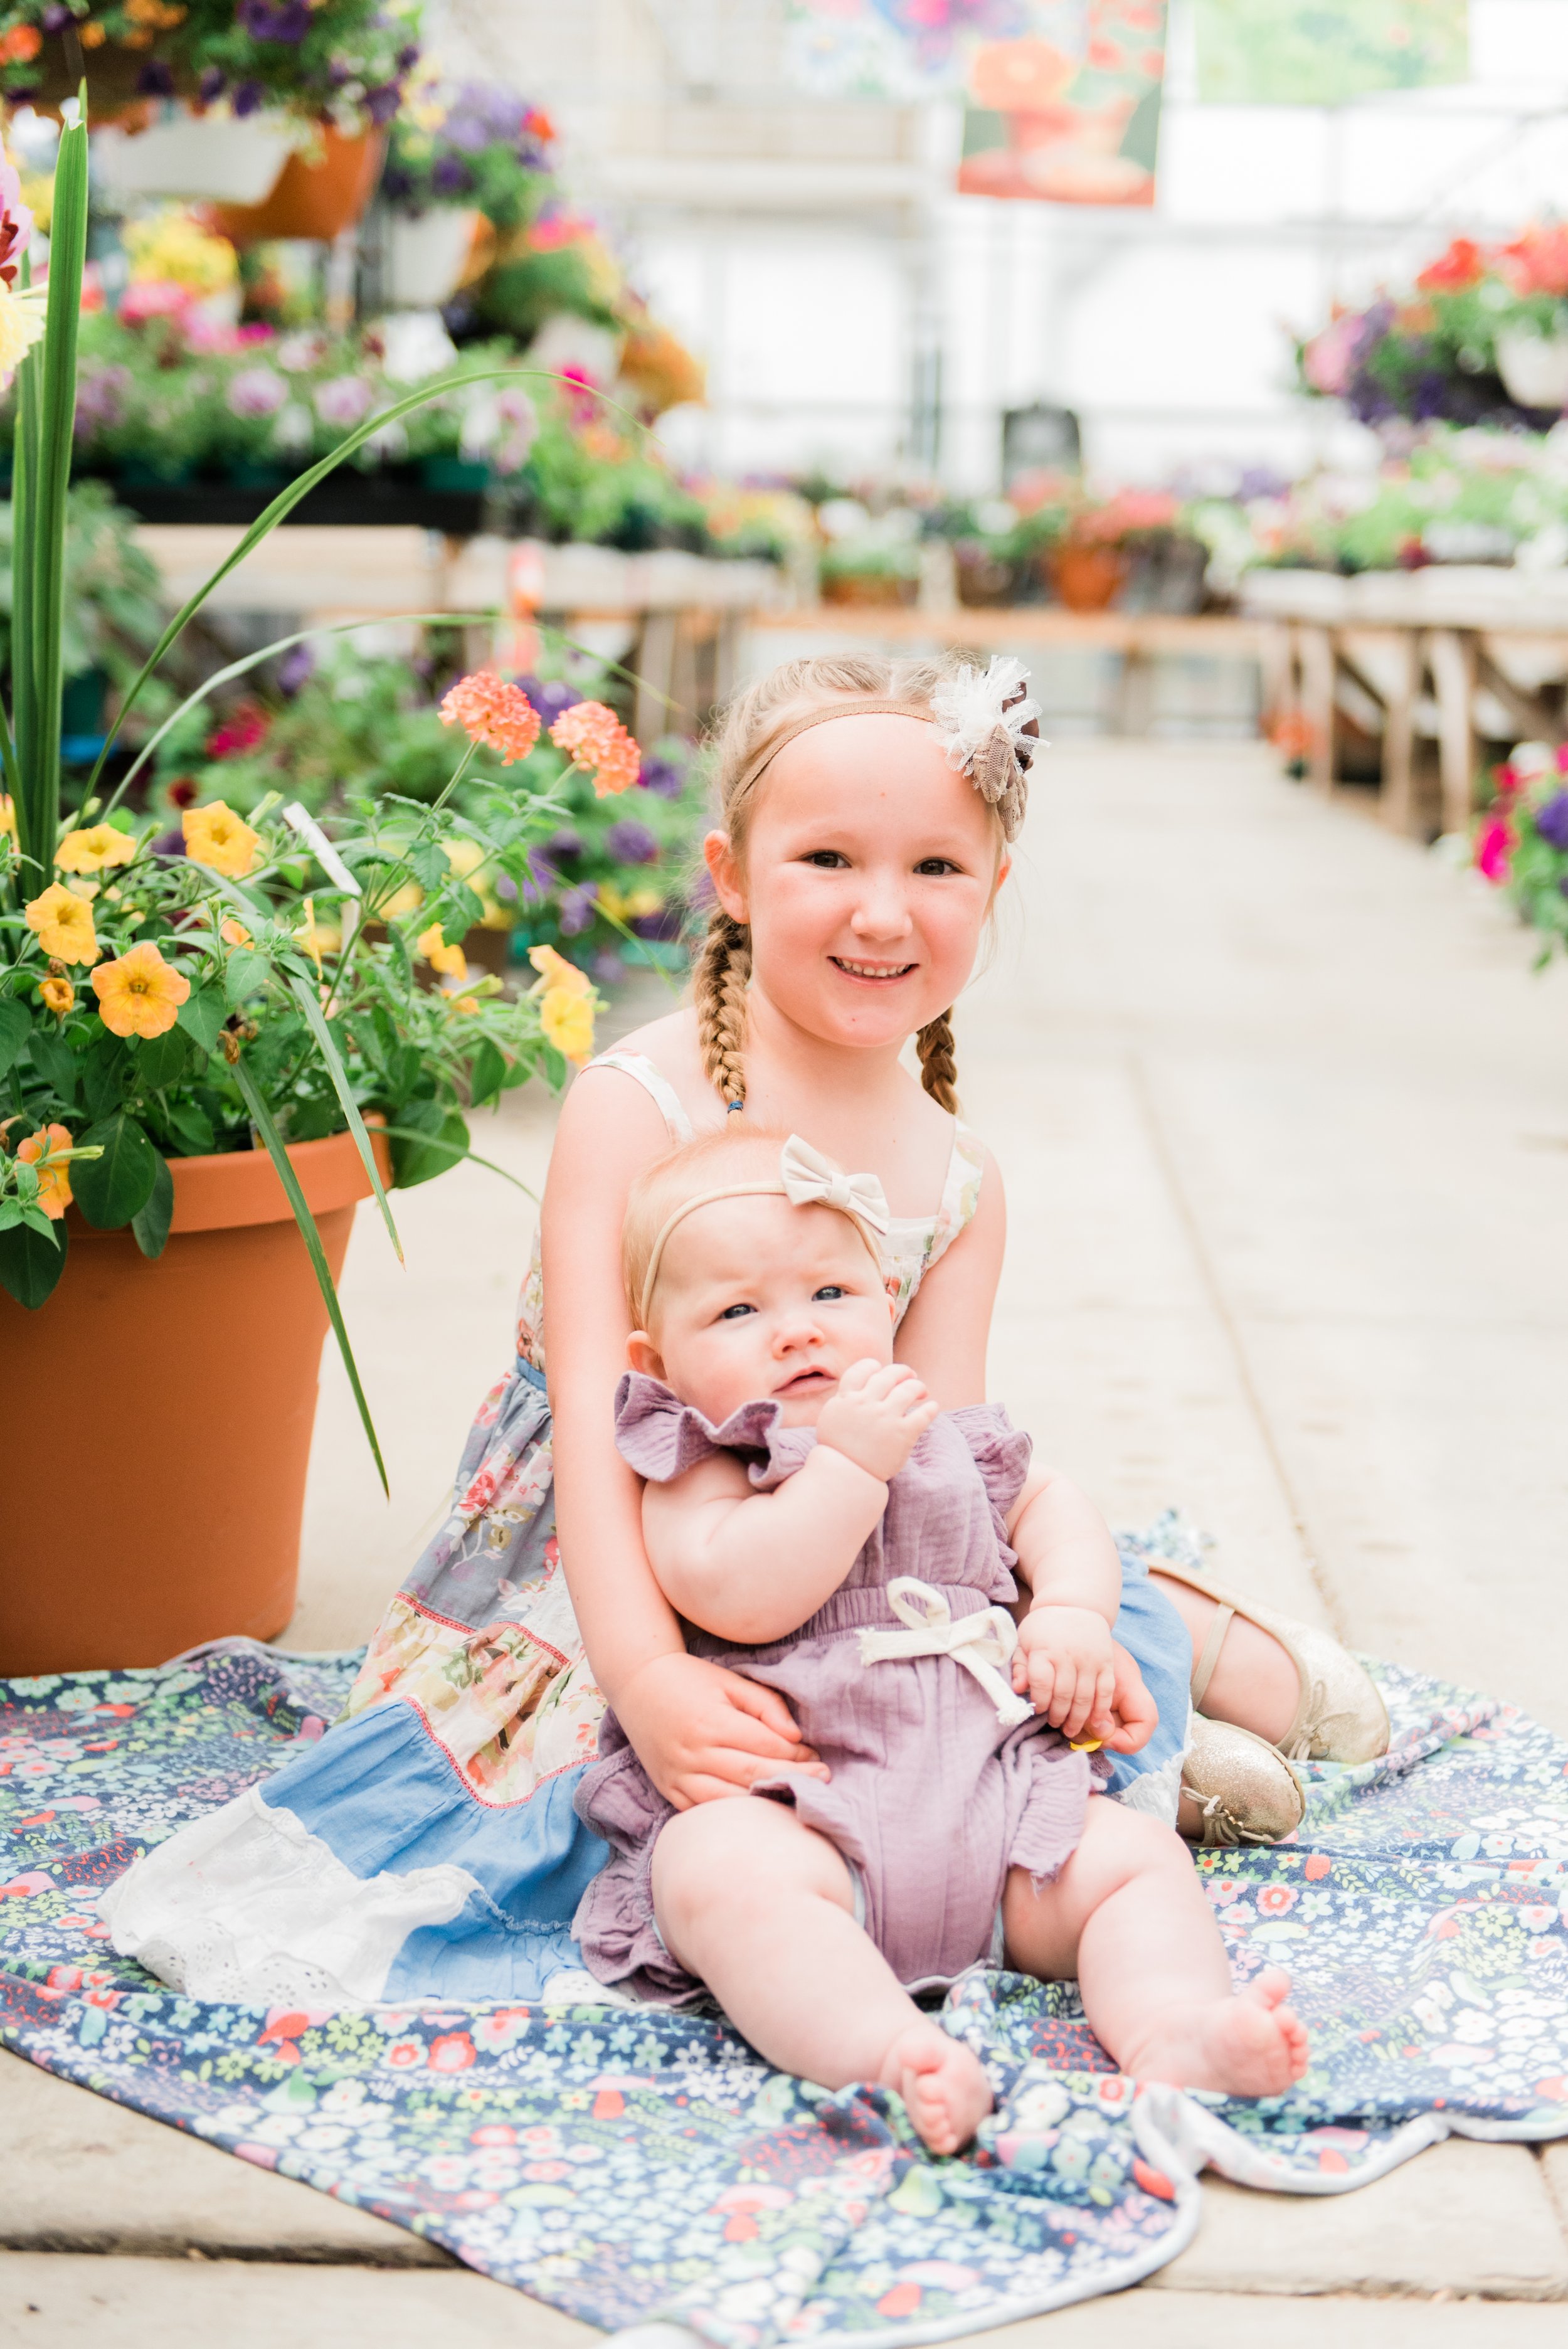  A big sister cradles her baby sister in a floral nursery full of colorful flowers. Sisters floral nursery lavender outfits Jacquie Erickson #babysister #gardennursery #bigsister #summerphotoshoot #jacquieerickson #georgiaphotographer 